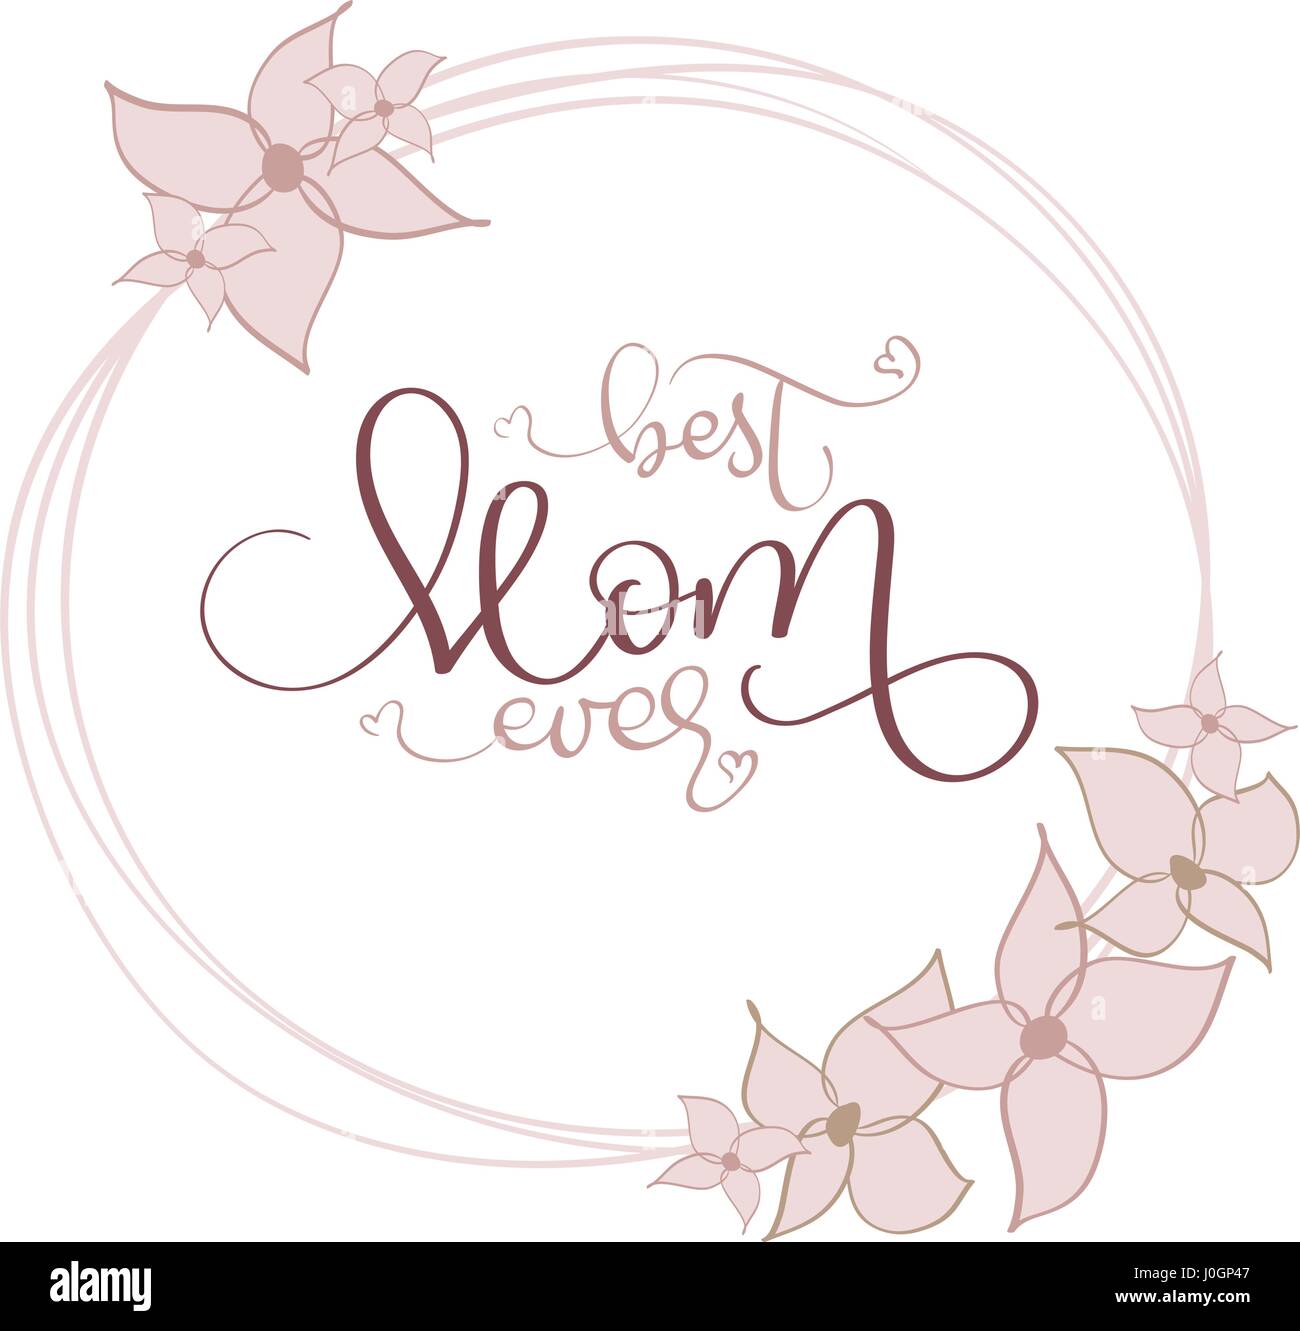 Best Mom ever vector vintage text in round flowers frame on white background. Calligraphy lettering illustration EPS10 Stock Vector